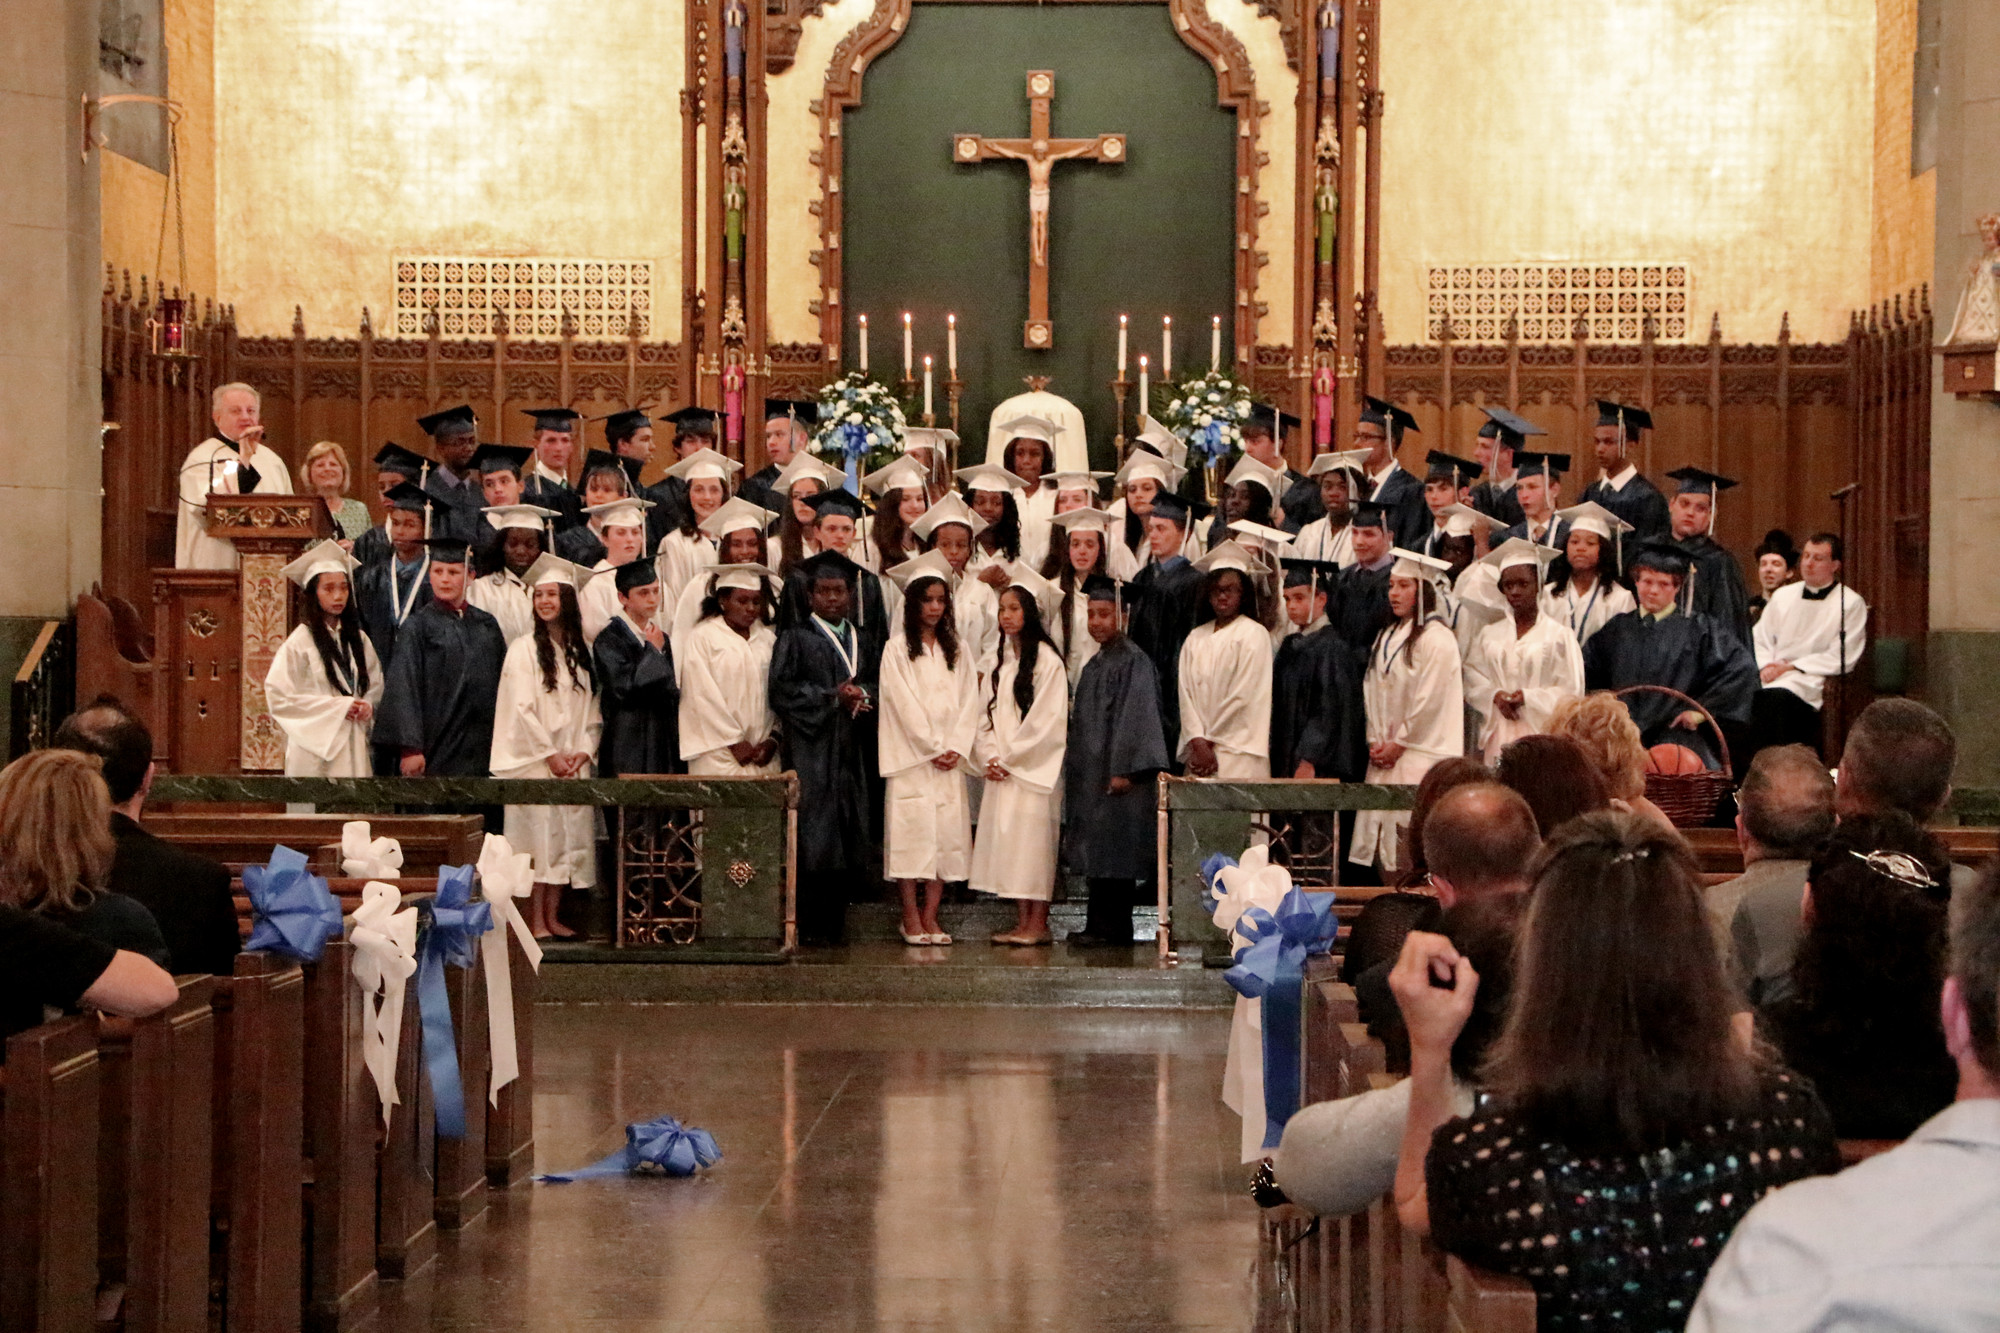 Graduates closed the cermoniy with a rendition of their school song.